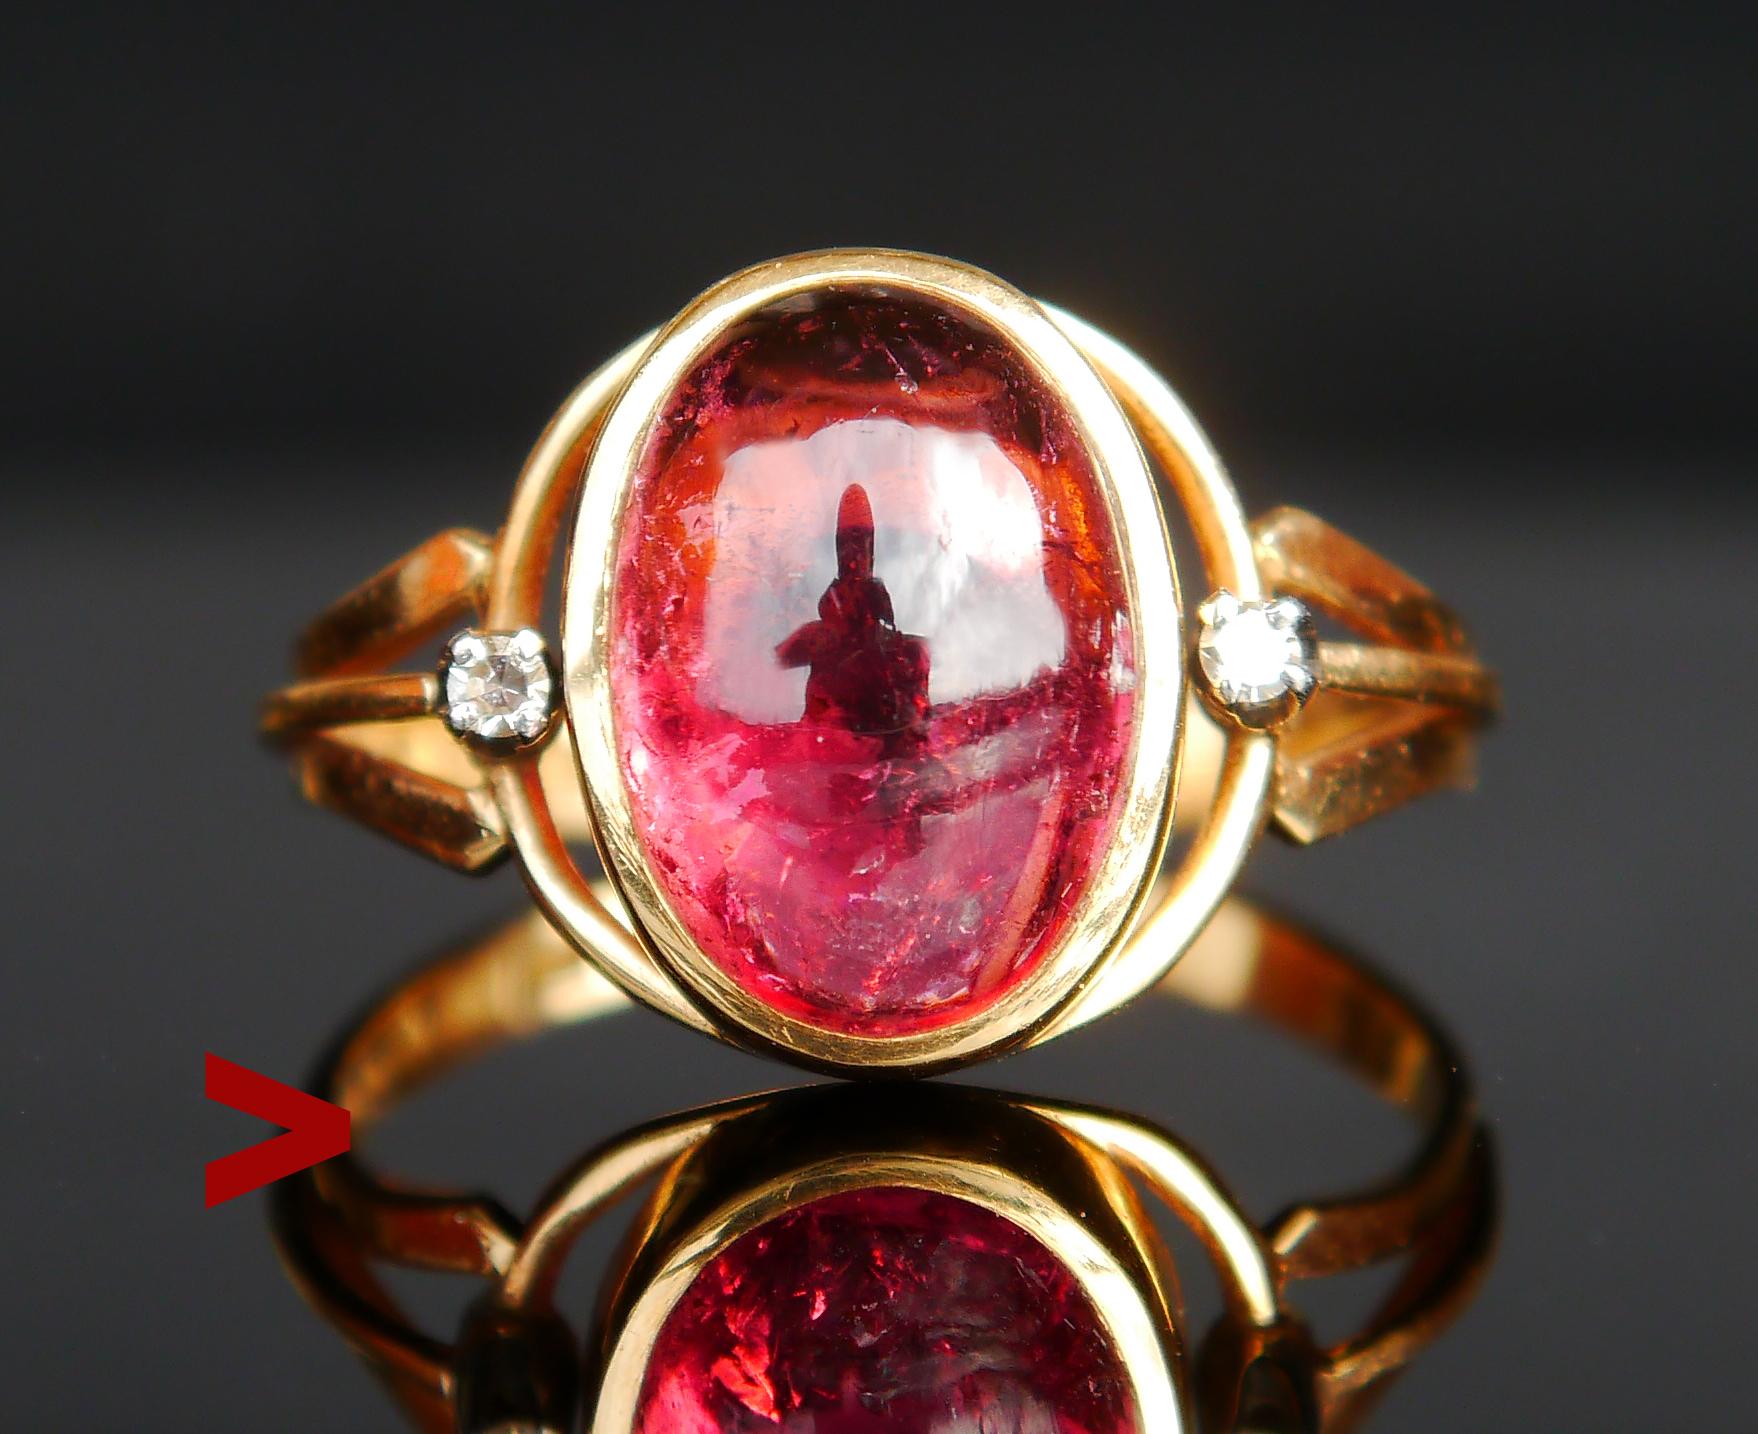 Fine vintage Ring in classic design. Band in solid 18K Gold. Bezel set natural transparent Rubellite / Red Tourmaline  cabochon cut 15 mm x 10 mm x 5.5 mm deep / ca. 7 ct, of vivid Pink color with highly reflective surface (never mind reflections on